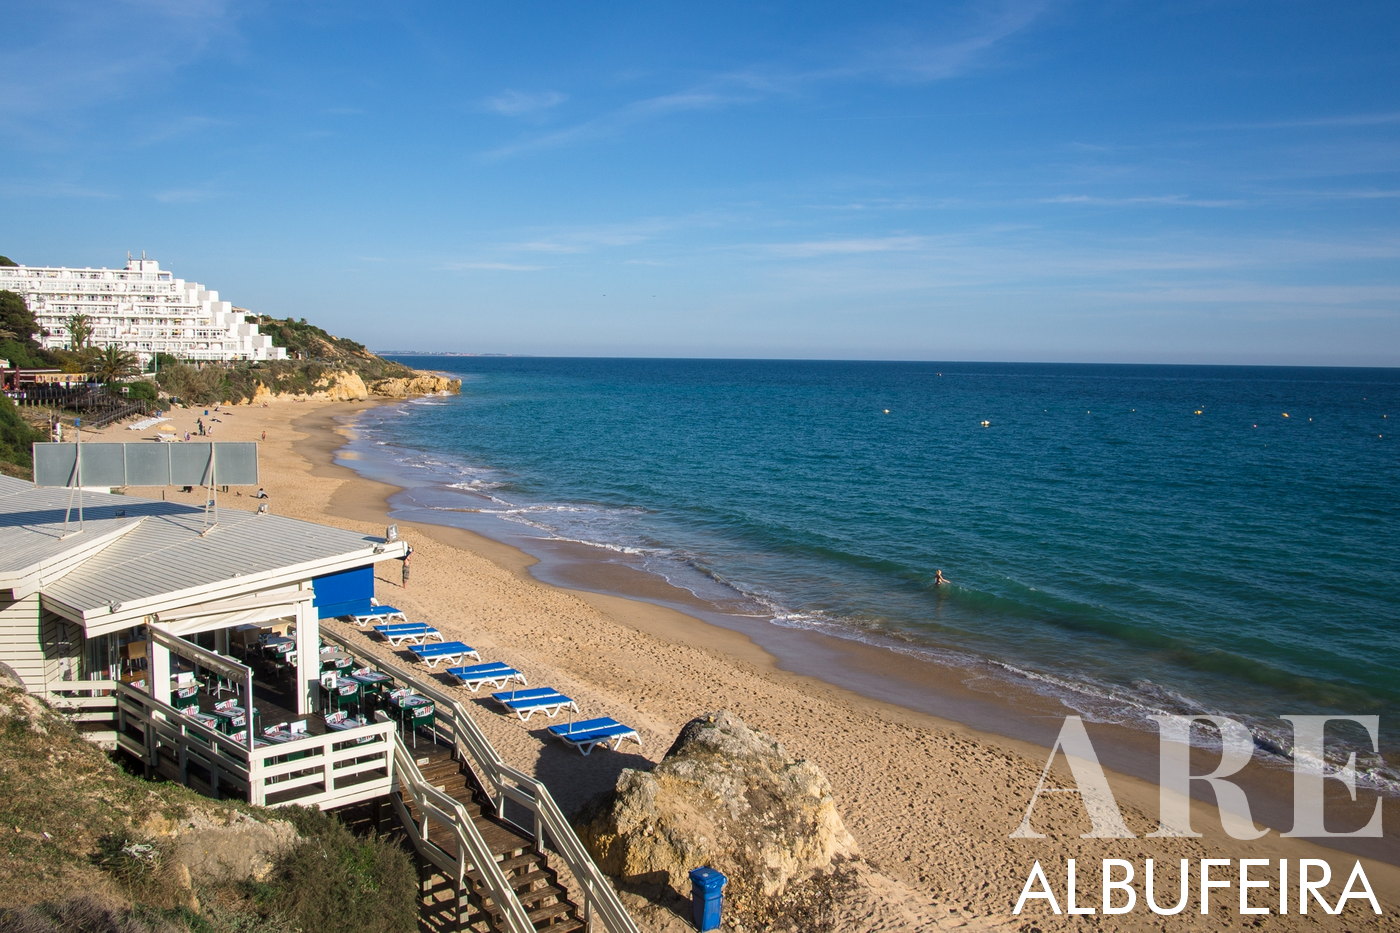 Peaceful and serene scene of Oura Beach in Albufeira, captured in the gentle light of March